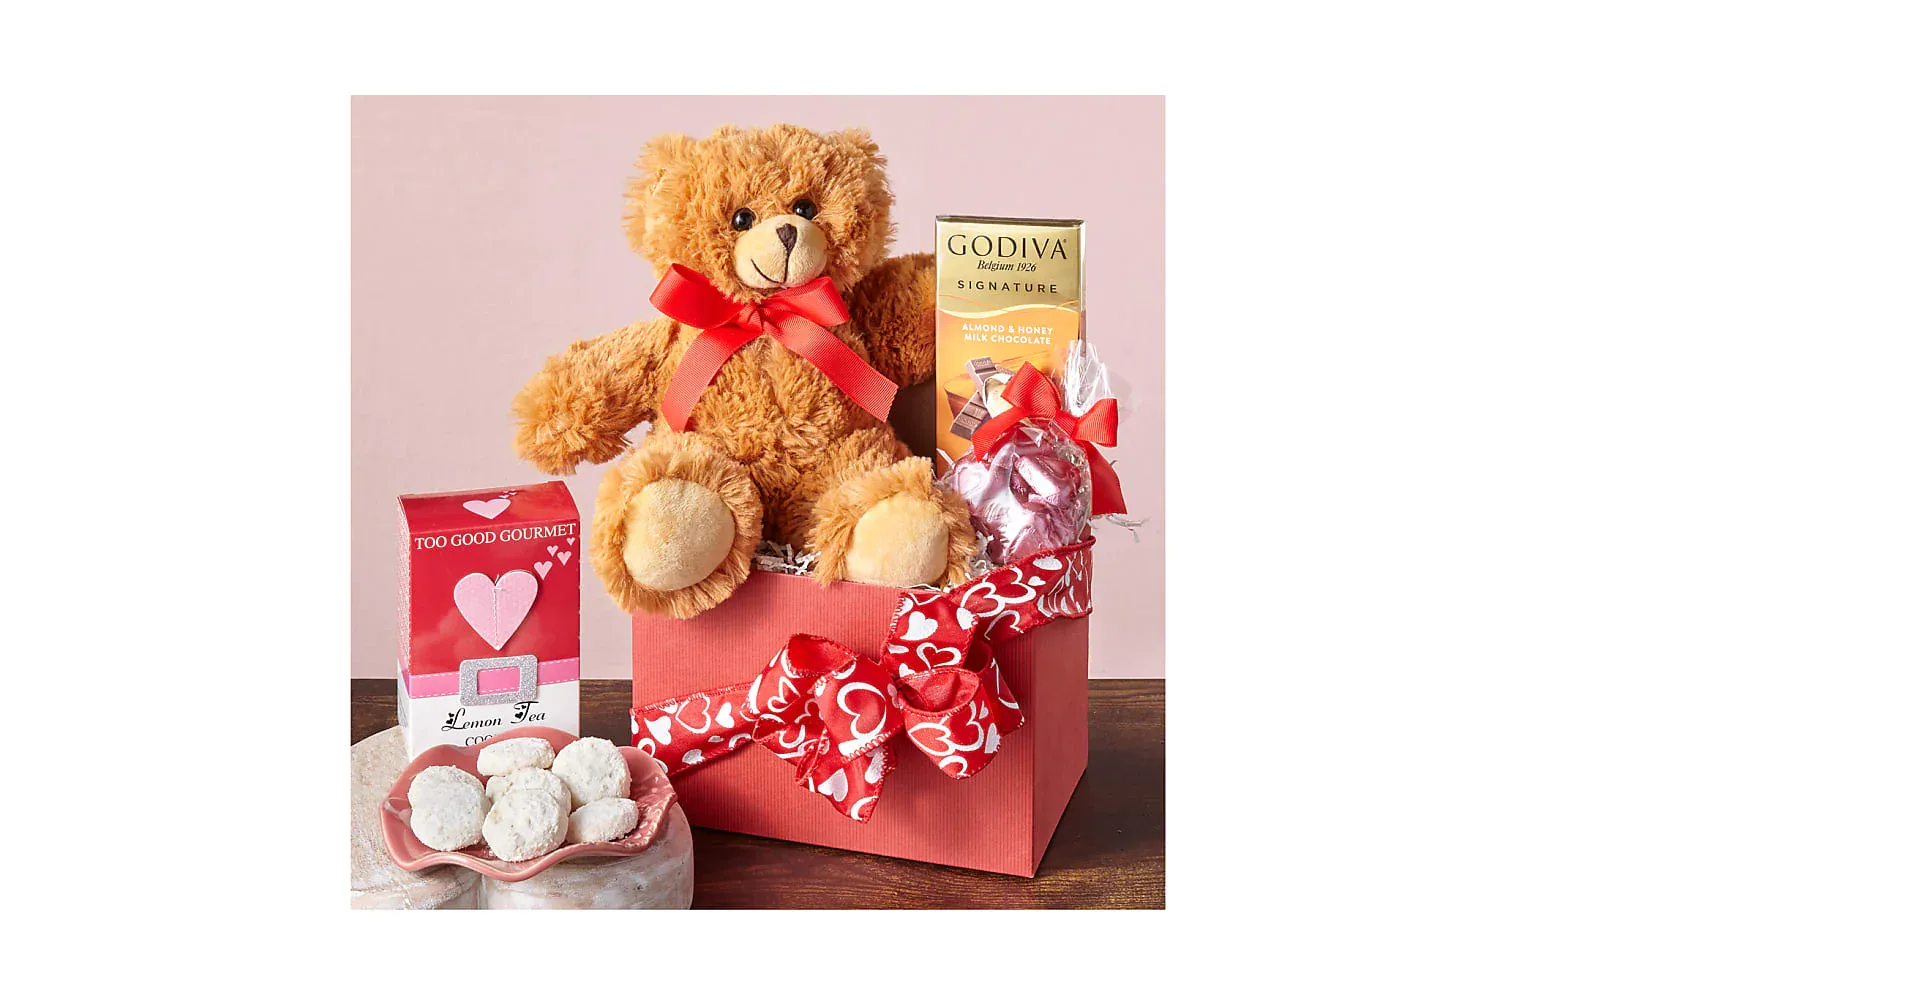 The Sweet & Simple Valentine’s Day Gift Guide for Kids